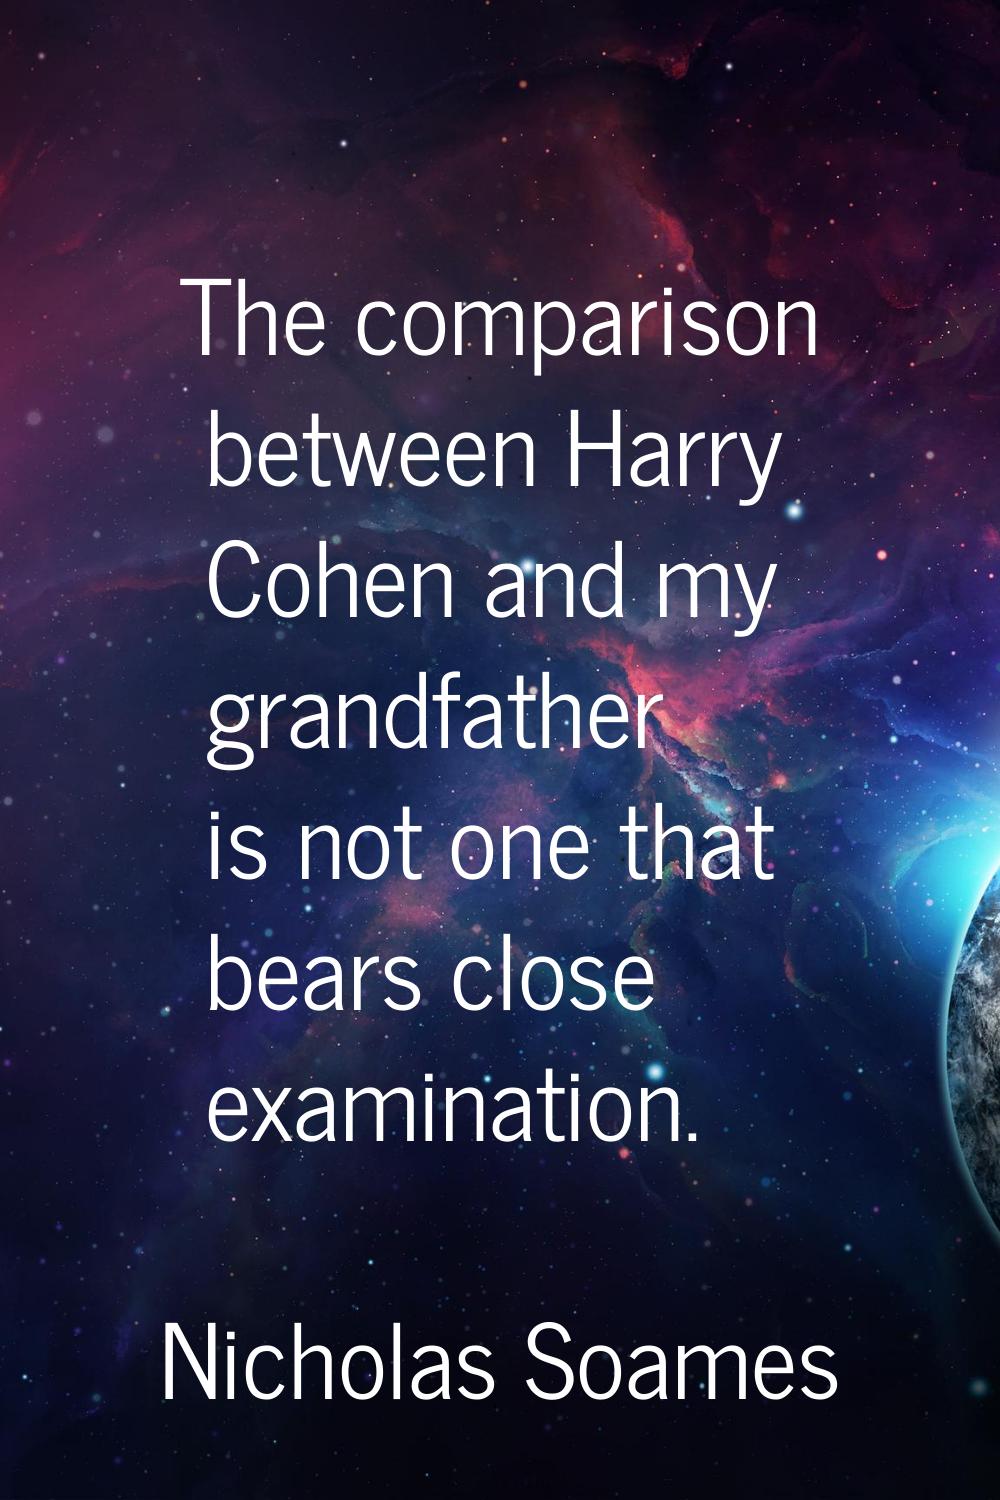 The comparison between Harry Cohen and my grandfather is not one that bears close examination.